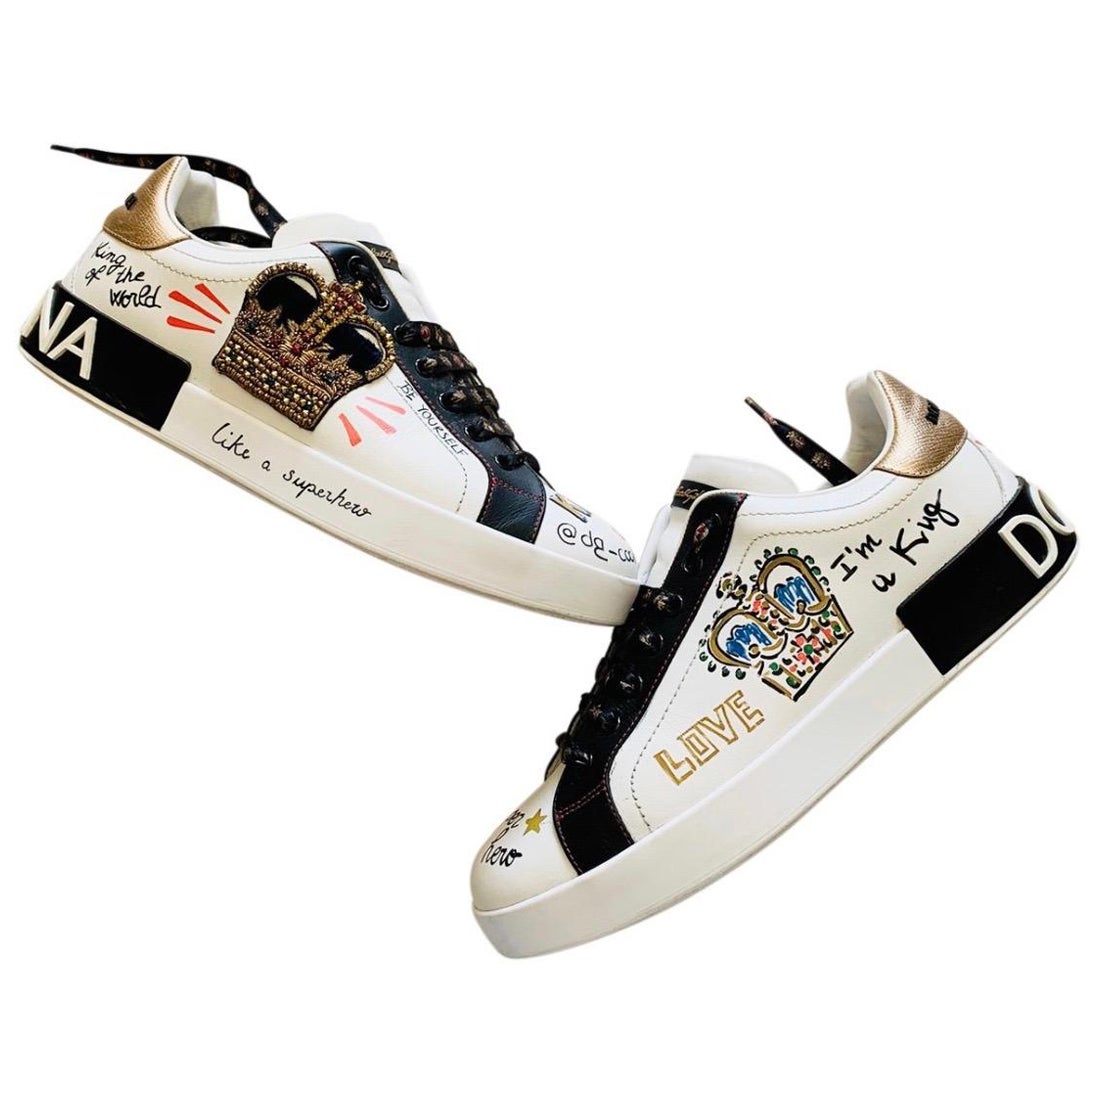 Dolce & Gabbana Men King
embellished trainers sneakers sports
shoes